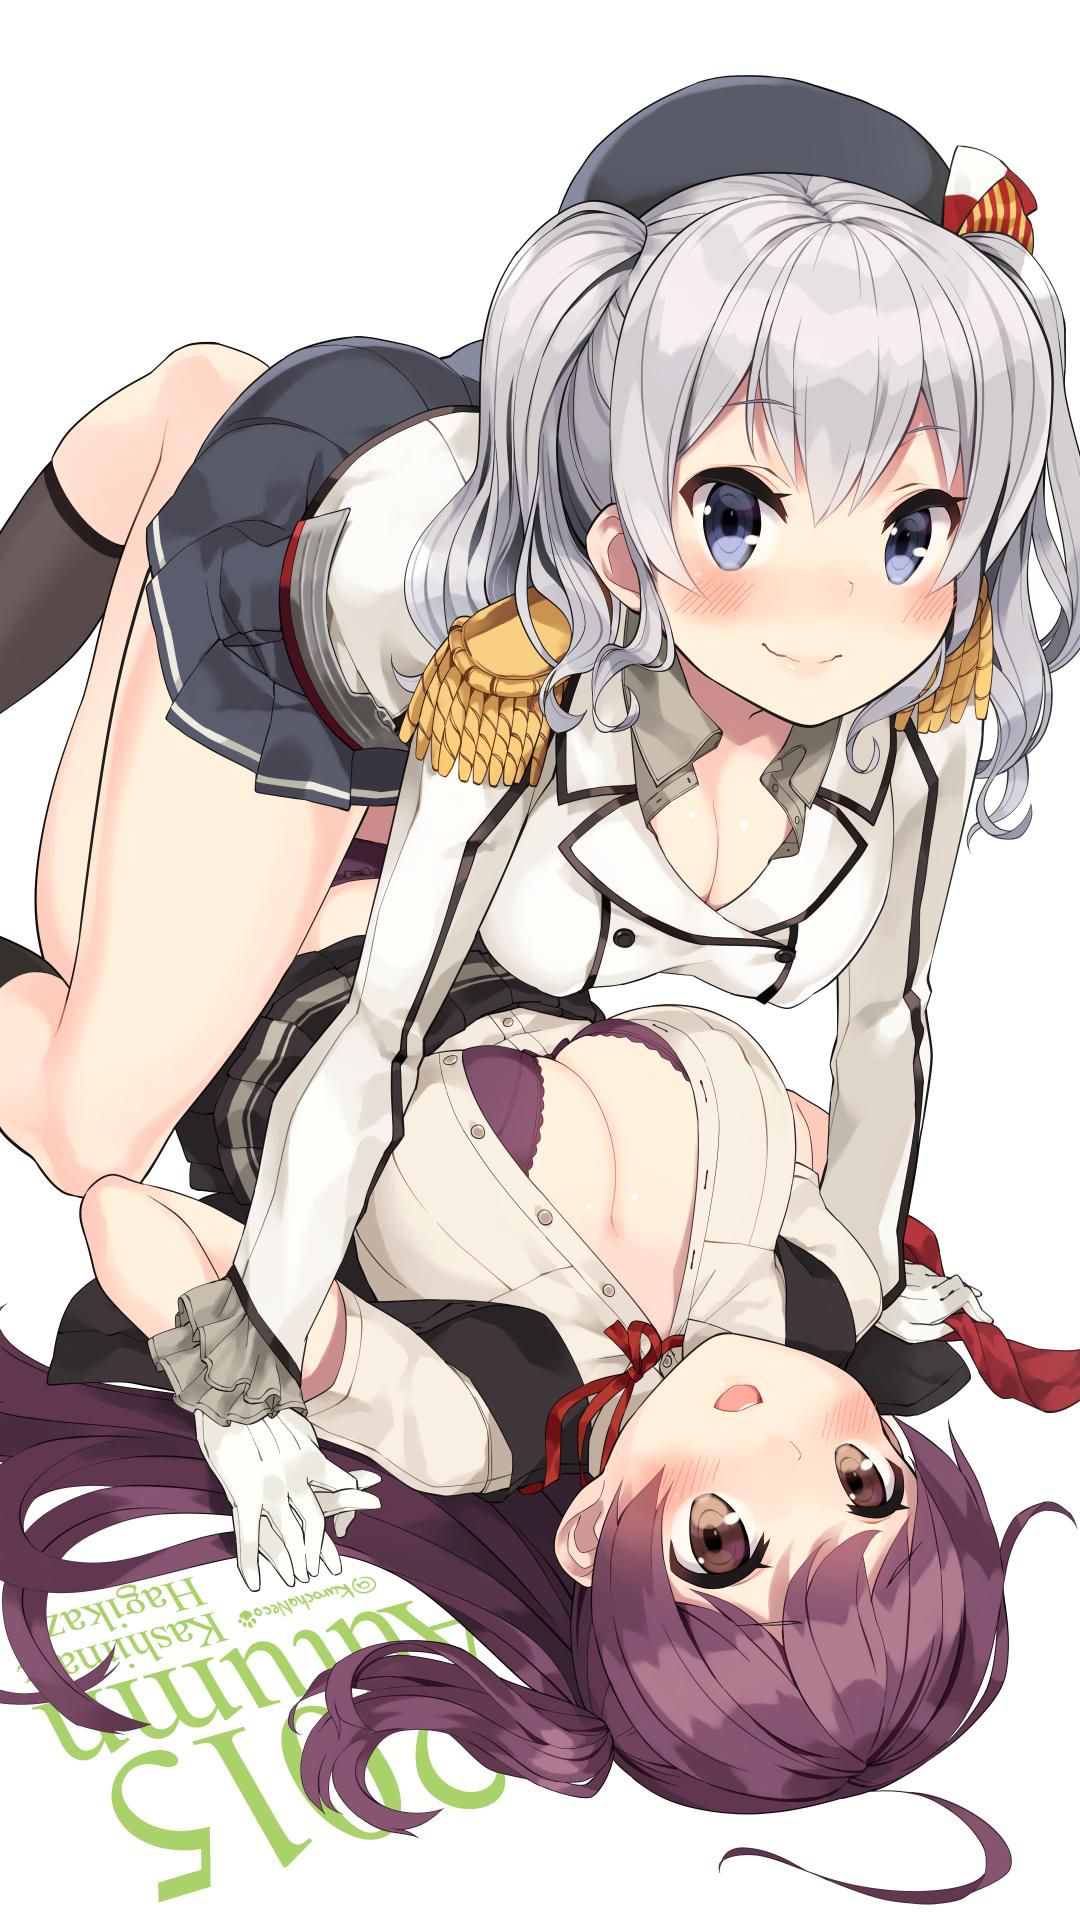 [Erotic] Ship of this new ship daughter of Kashima Image surge www wwwwww part1 22